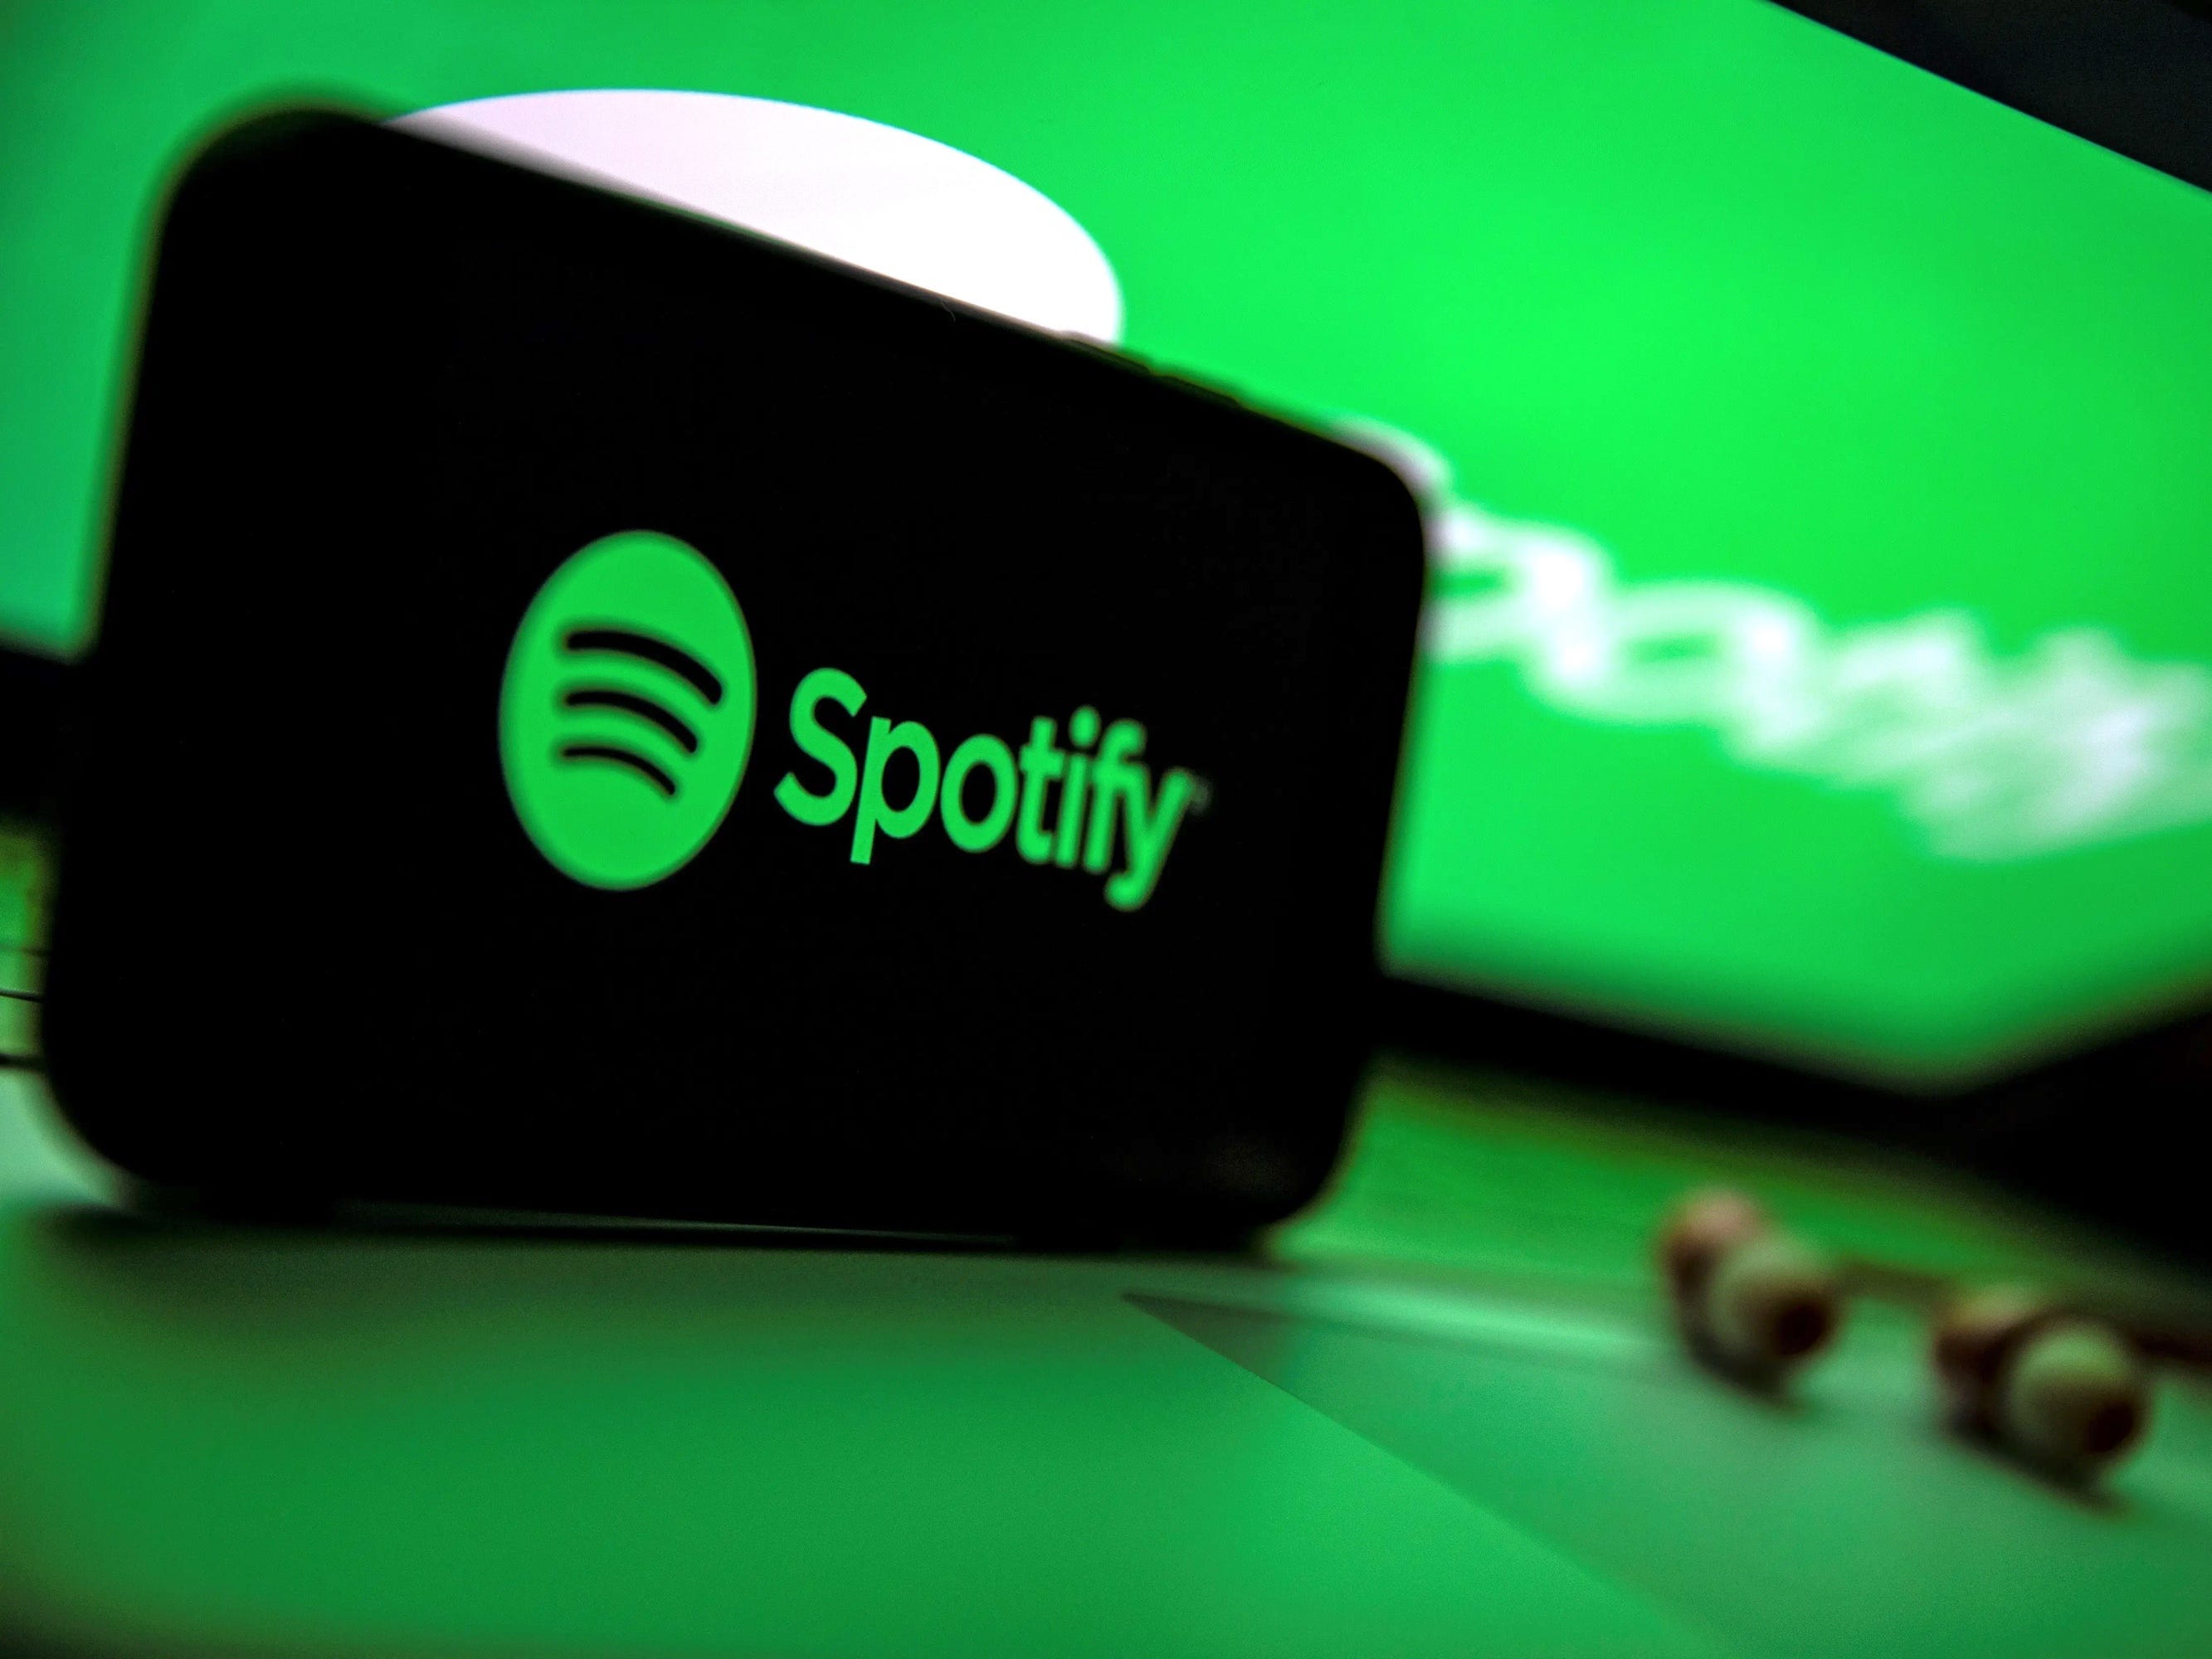 <ul class="summary-list"> <li><strong>Spotify is the latest company to announce layoffs.</strong></li> <li><strong>In recent months, layoffs have expanded beyond tech, media, and finance as Gap and Whole Foods announced cuts. </strong></li> <li><strong>See the full list of layoffs so far in 2023. </strong></li> </ul><p><a href="https://www.businessinsider.com/layoffs-sweeping-the-us-these-are-the-companies-making-cuts-2022-5">A wave of layoffs</a> that hit dozens of US companies toward the end of 2022 shows no sign of slowing down into 2023.</p><p>Spotify is the latest company to announce layoffs, according to a <a href="https://newsroom.spotify.com/2023-06-05/an-update-on-changes-to-spotifys-podcast-business-june-2023/" rel="noopener">memo sent to employees</a> from the company.</p><p>In the memo, the vice president of Spotify's podcast business Sahar Elhabashi explained the layoffs would impact around 200 employees. A Spotify spokesperson told Insider the layoffs would impact employees a part of Spotify's podcast business and its supporting functions, including talent acquisition and financial roles. This is the second round of layoffs the company has announced this year: In January, Spotify's CEO said the company would cut 6% of its staff.</p><p>The recent layoffs are a part of the brand's decision to change how it works with podcast partners around the globe and would help the brand "support the creator community better," the memo read.</p><p>The news comes less than a week after cryptocurrency exchange company Binance announced it was considering staff cuts, and on the heels of recent layoffs at companies including  JPMorgan Chase, LinkedIn and Shopify.  </p><p>These companies join a large number of major corporations that have made significant cuts in the new year: Tech companies, including Meta and Google, and finance behemoths, like Goldman Sachs, announced massive layoffs in the first weeks of 2023 amid a continued economic downturn and stagnating sales.</p><p>The downsizing followed significant reductions that companies including Meta and Twitter made last year. </p><p>The layoffs have primarily affected the tech sector, which is now hemorrhaging employees at a faster rate than at any point during the pandemic, <a href="https://www.wsj.com/articles/tech-layoffs-are-happening-faster-than-at-any-time-during-the-pandemic-11672705089">the Journal reported</a>. According to data cited by the Journal from <a href="https://layoffs.fyi/" rel="noopener">Layoffs.fyi</a>, a site tracking layoffs since the start of the pandemic, tech companies slashed more than 187,000 in 2023 alone — compared to 80,000 in March to December 2020 and 15,000 in 2021. </p><p>But it's not just tech companies that are cutting costs, with the major job reductions that have come from the Gap, along with FedEx, Dow, and Wayfair.</p><p>Here are notable job cuts so far in 2023: </p><div class="read-original">Read the original article on <a href="https://www.businessinsider.com/layoffs-sweeping-the-us-these-are-the-companies-making-cuts-2023">Business Insider</a></div>